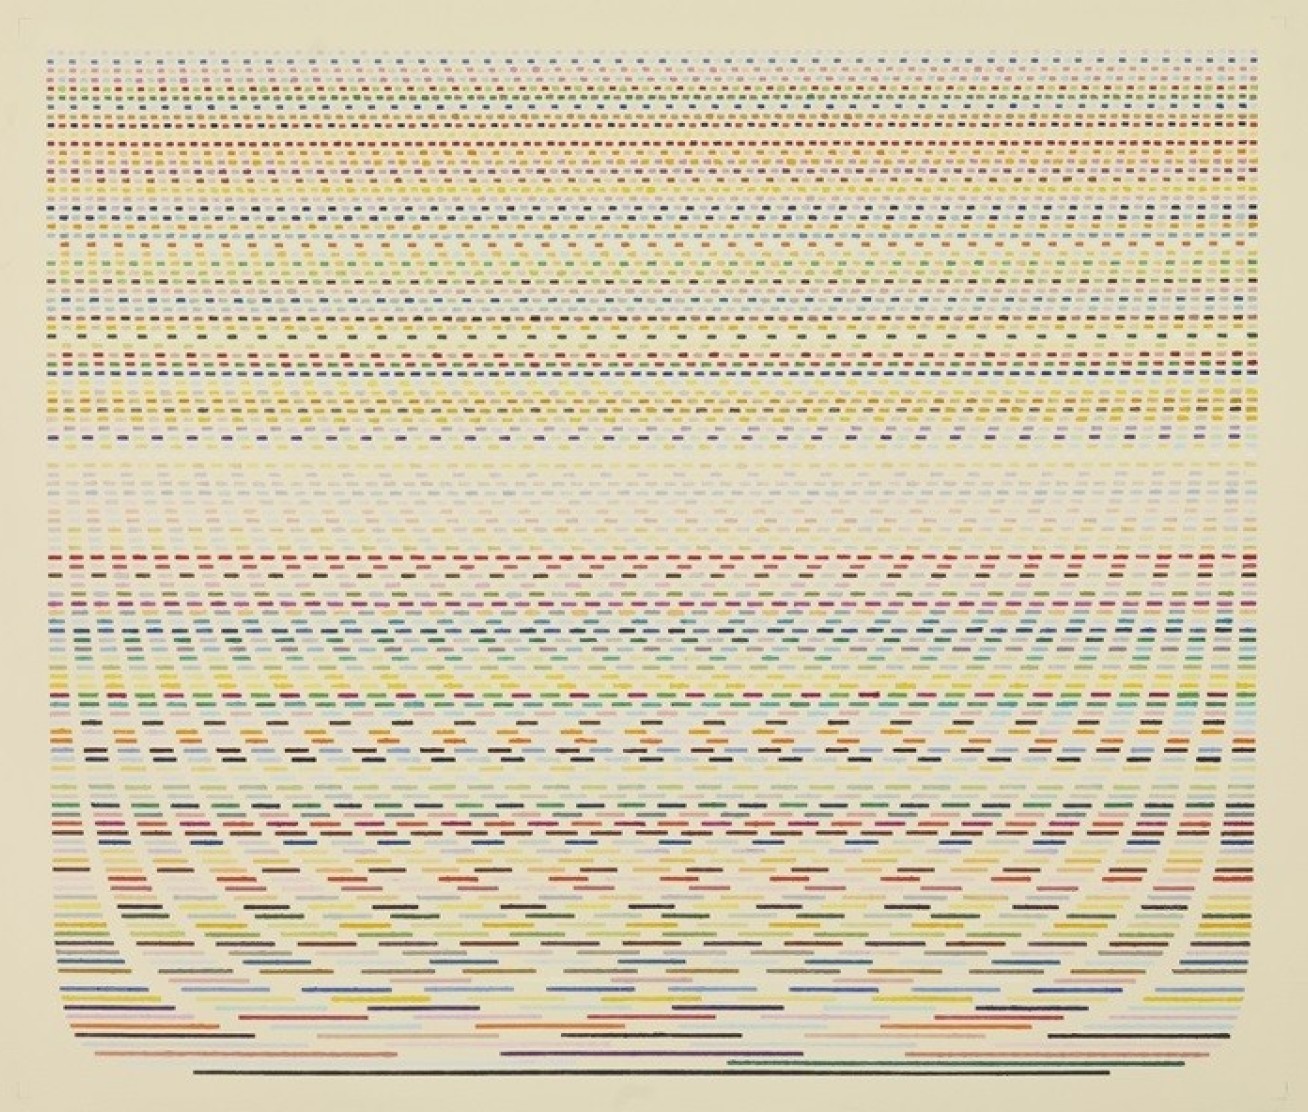 Image made of layers of coloured dots and dashes